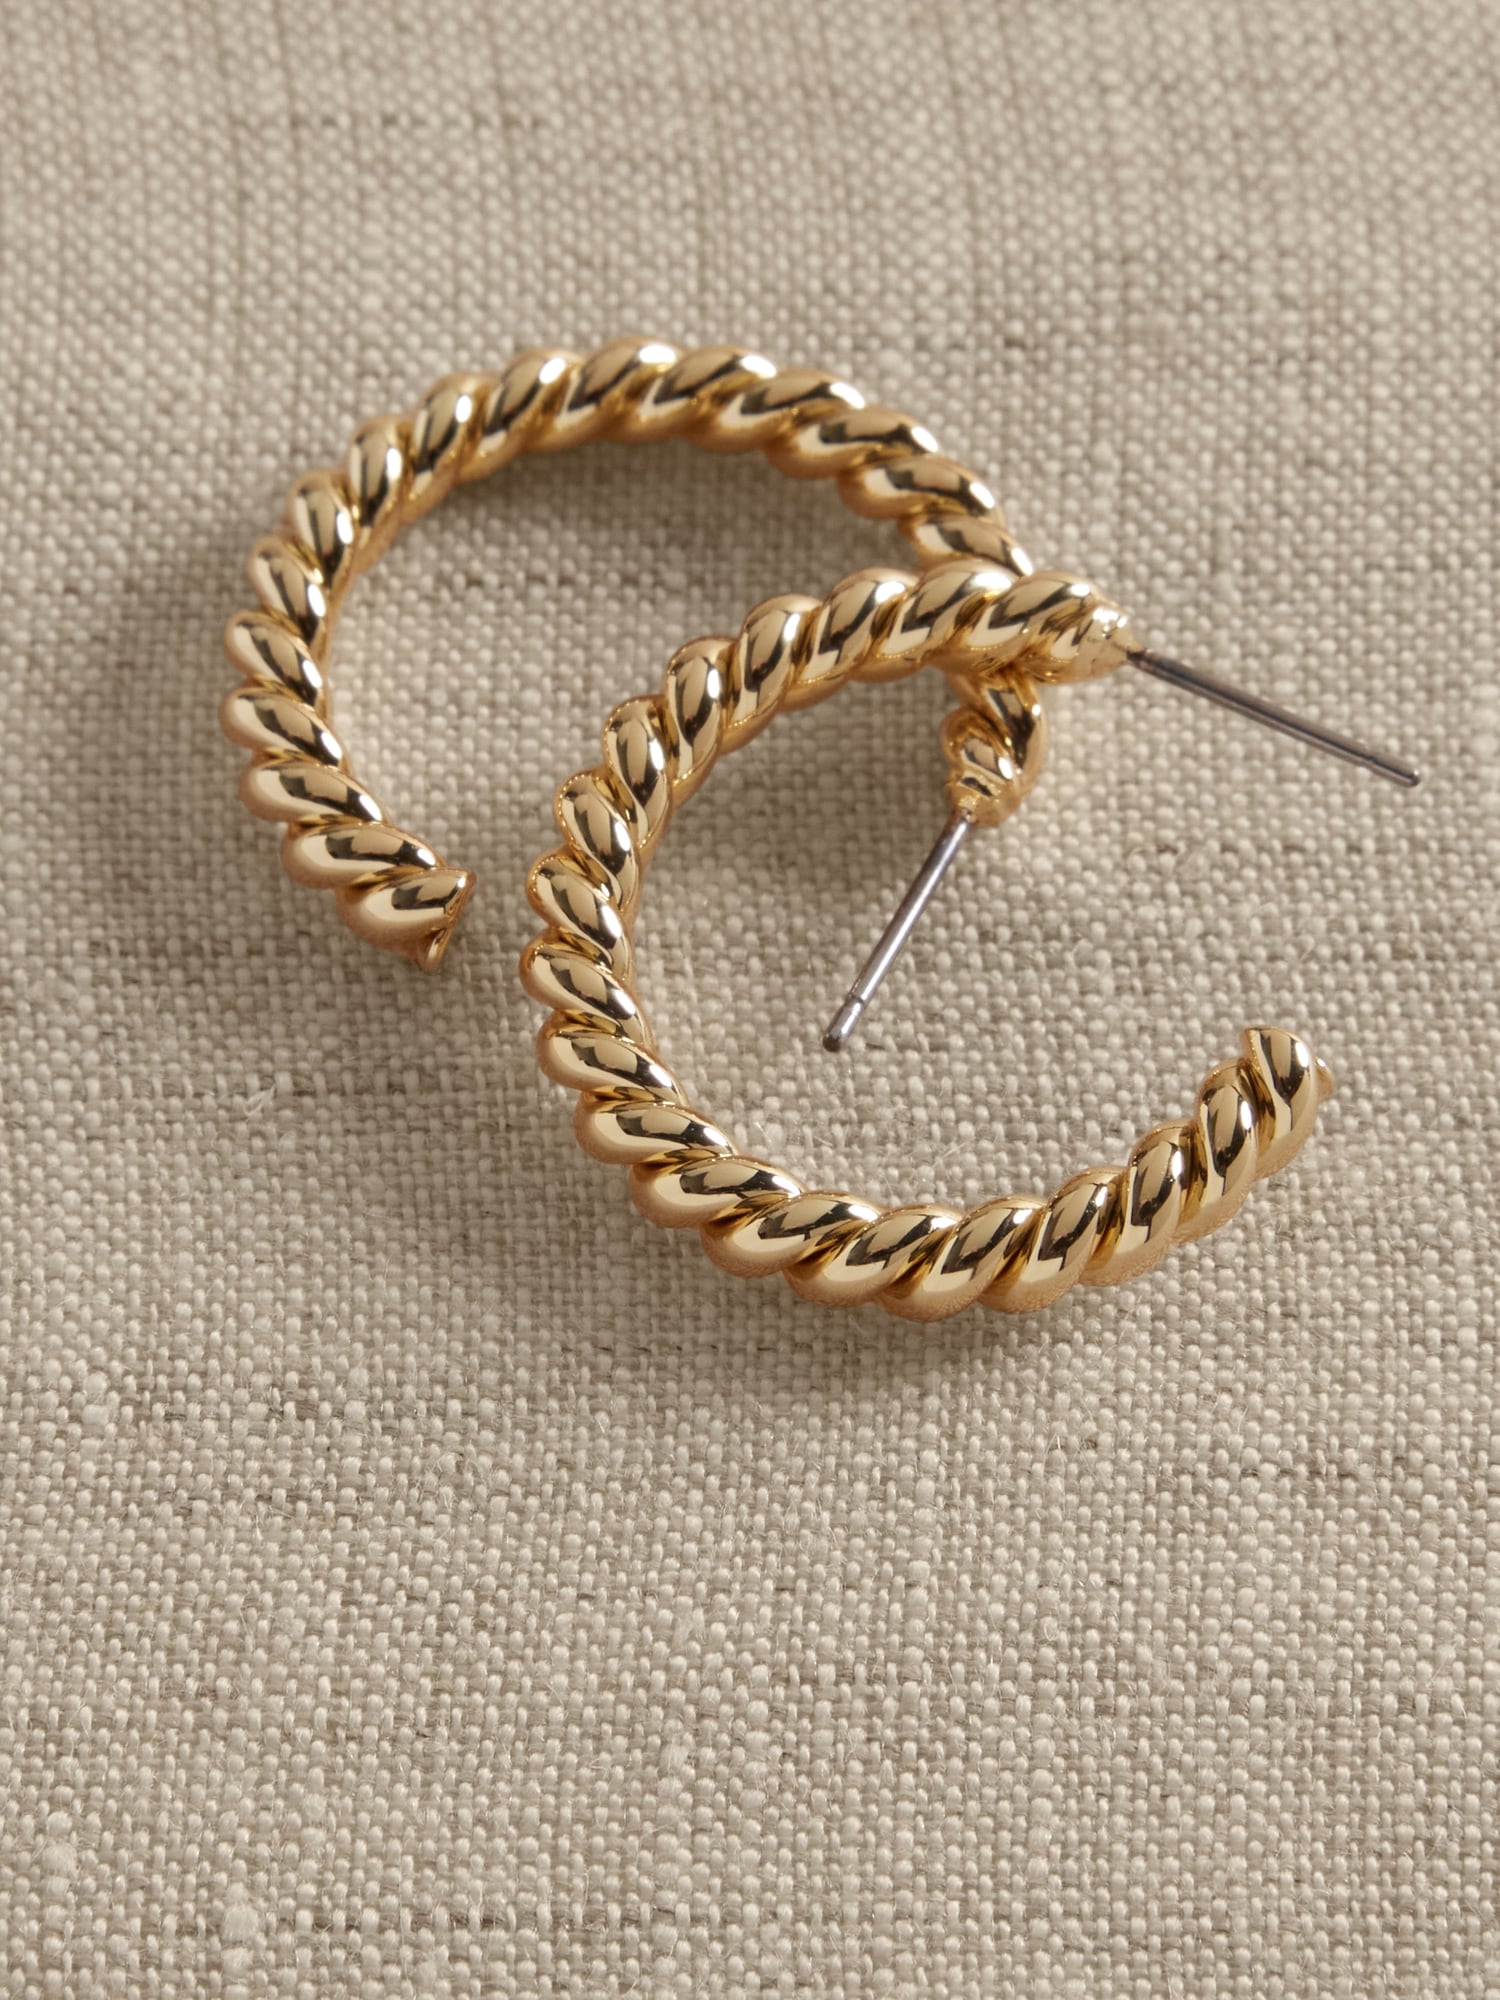 14K Gold Plated Croissant Hoop Earring